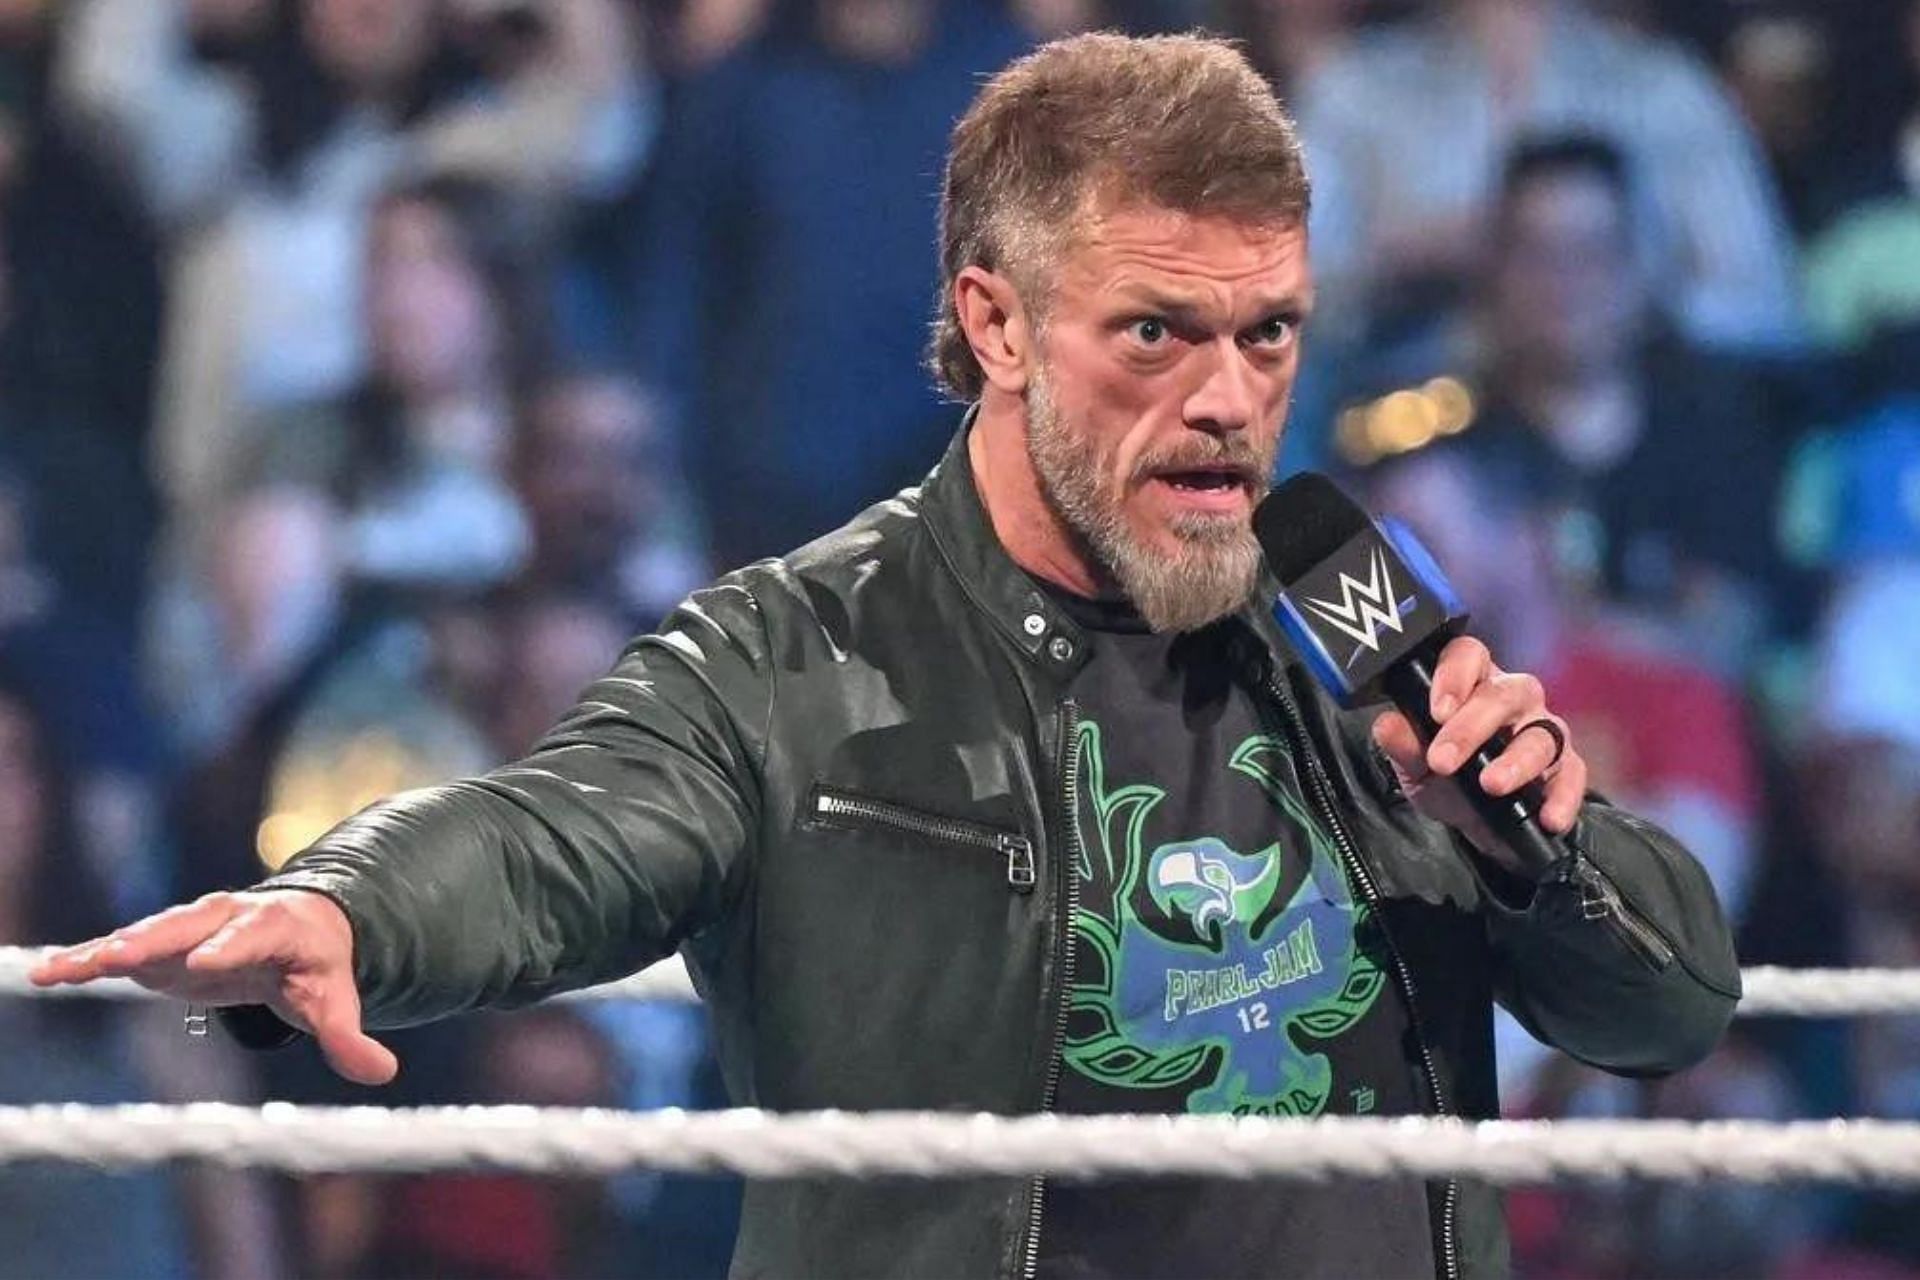 Will Edge remain healthy in AEW?